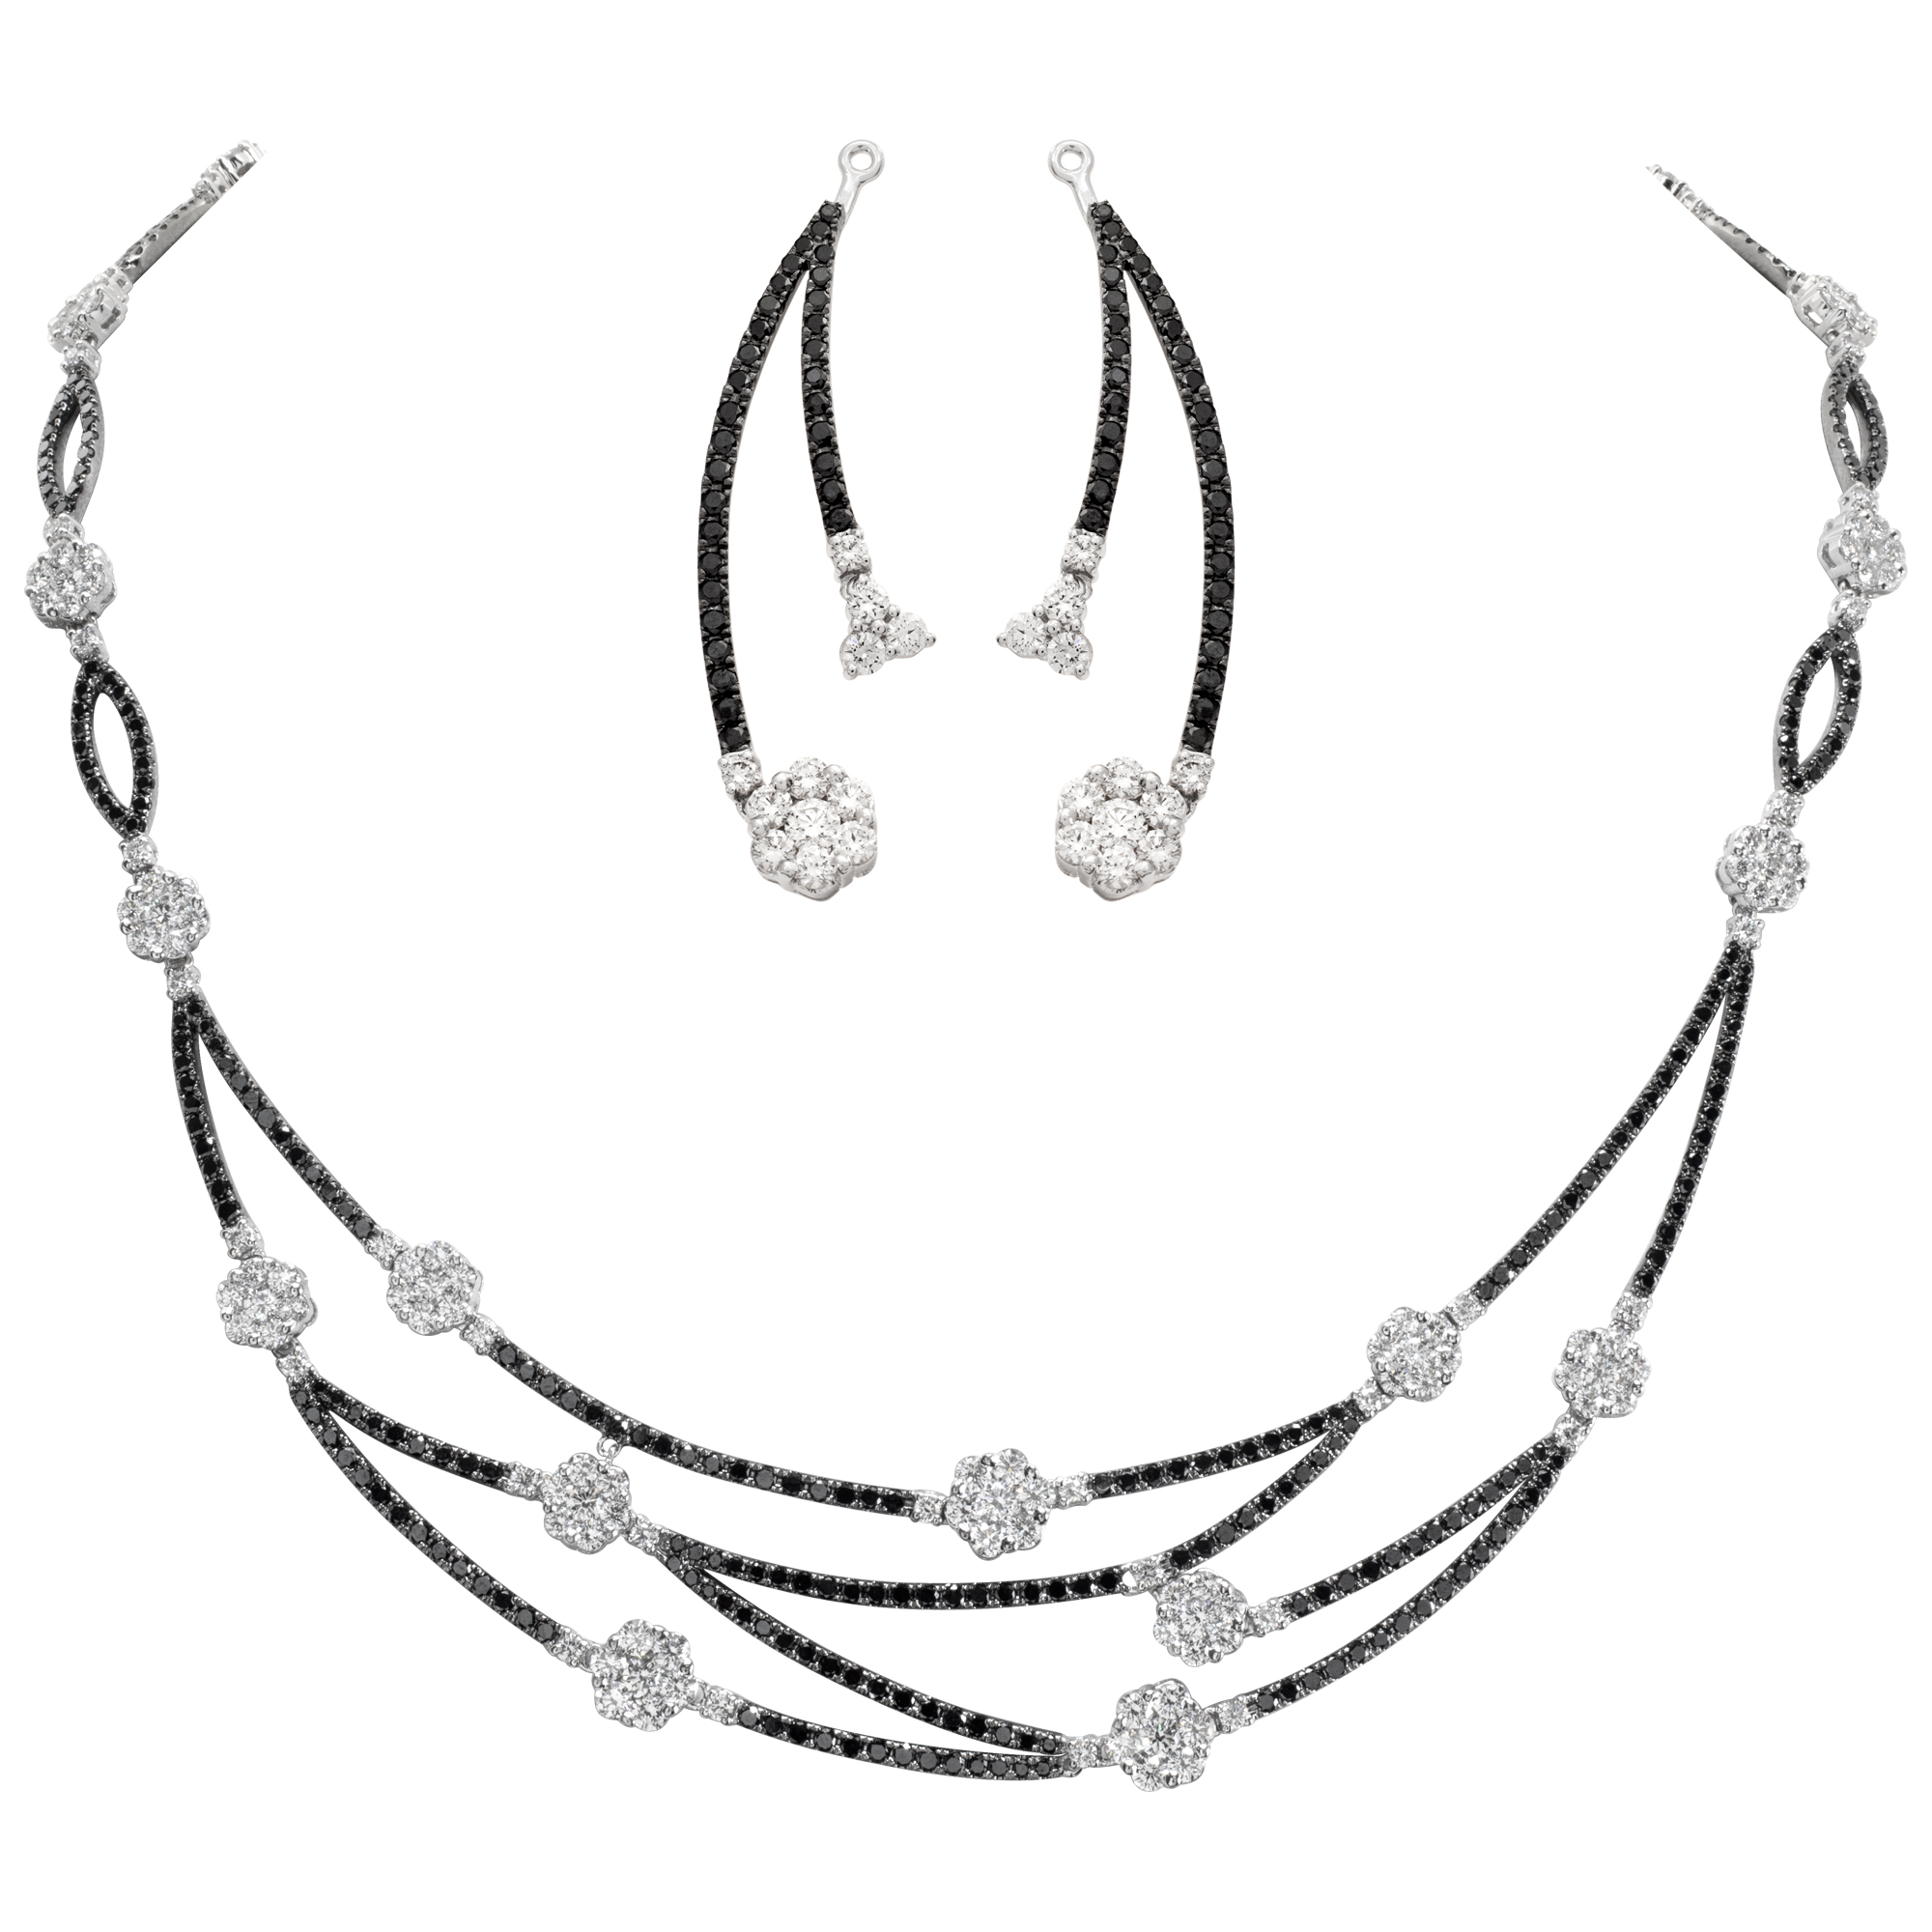 Diamond and Black Sapphire Necklace with matching earring jackets in 18k white gold